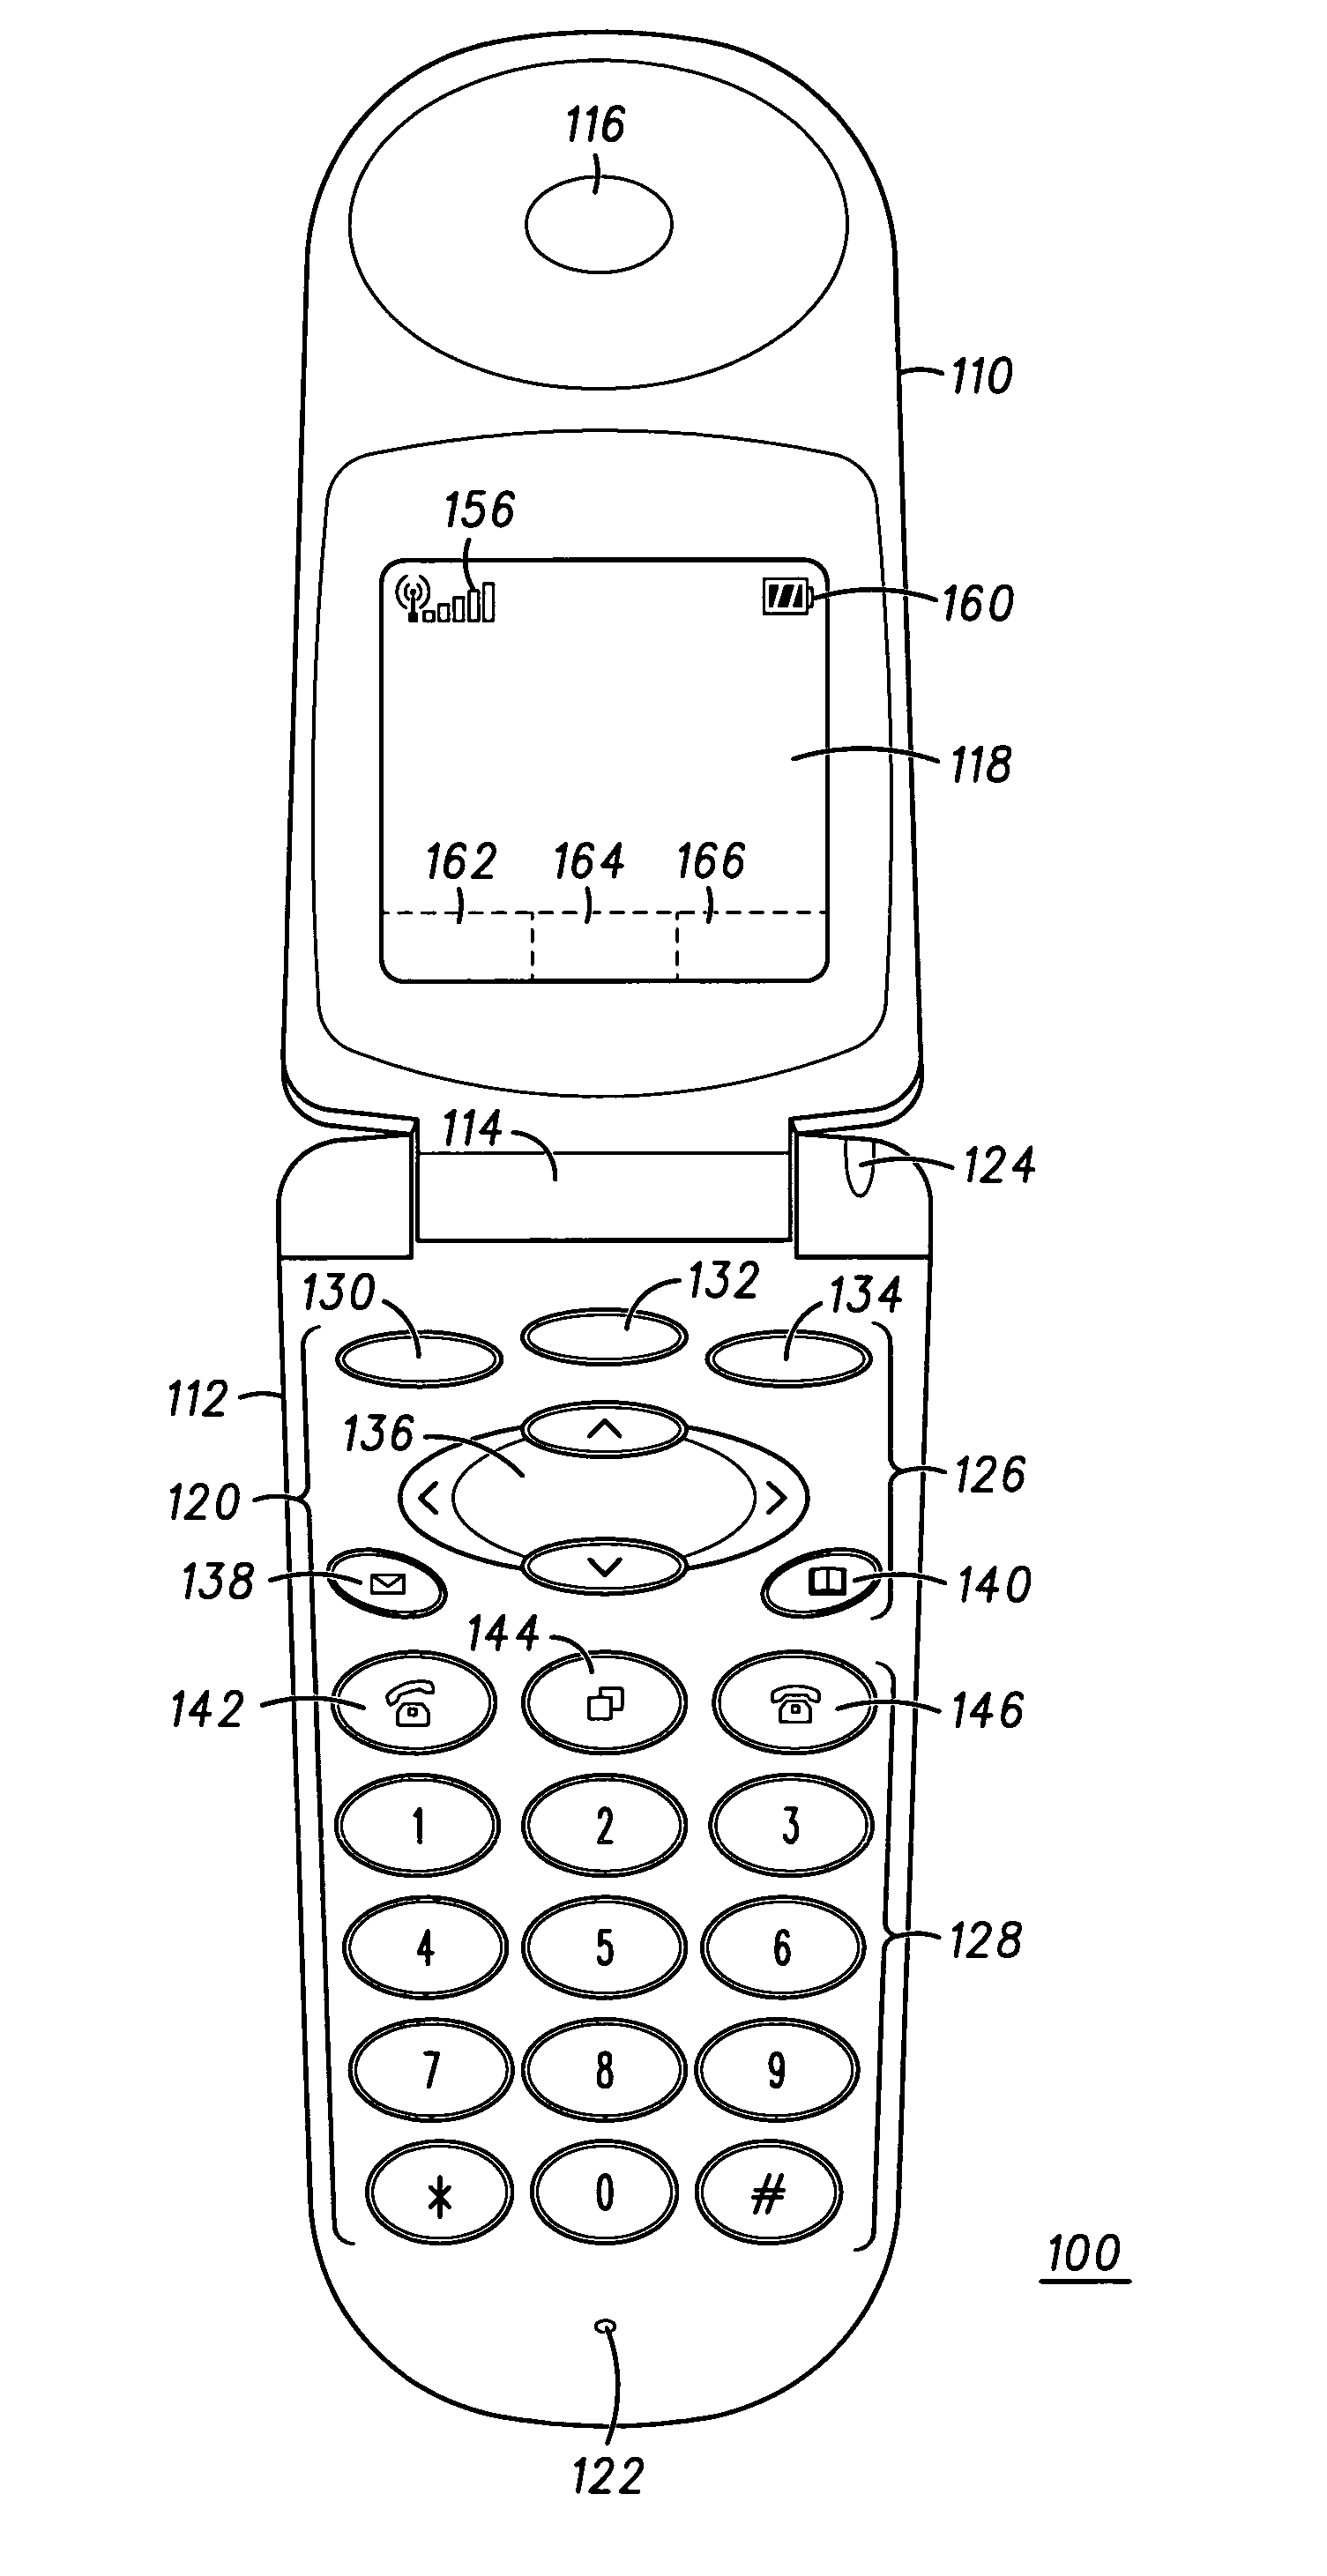 Apparatus and method for forming compound words